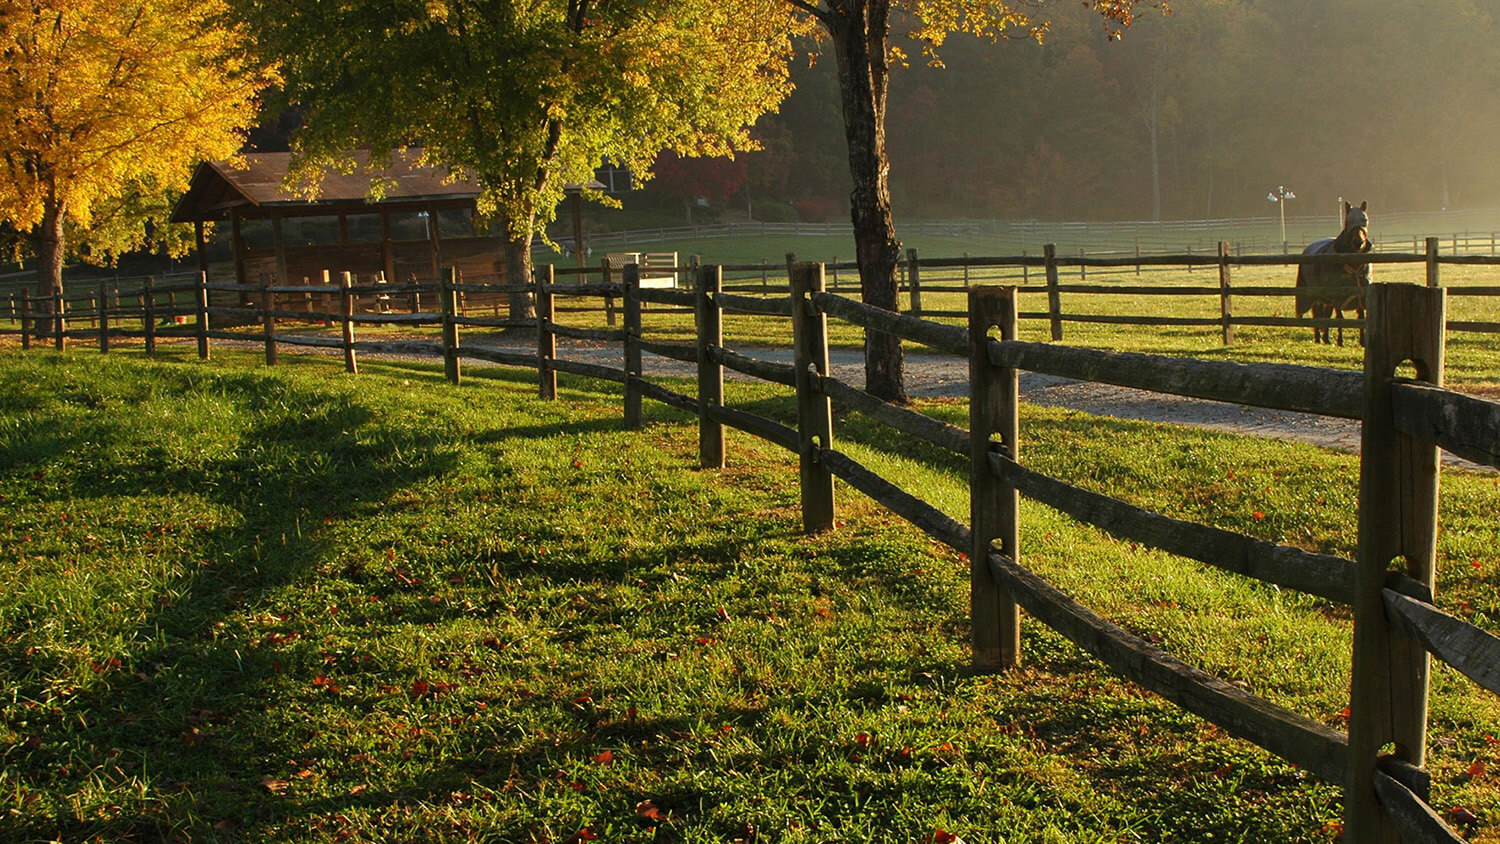 Horse pastures at the Bright's Creek Equestrian Center in Mill Spring, NC